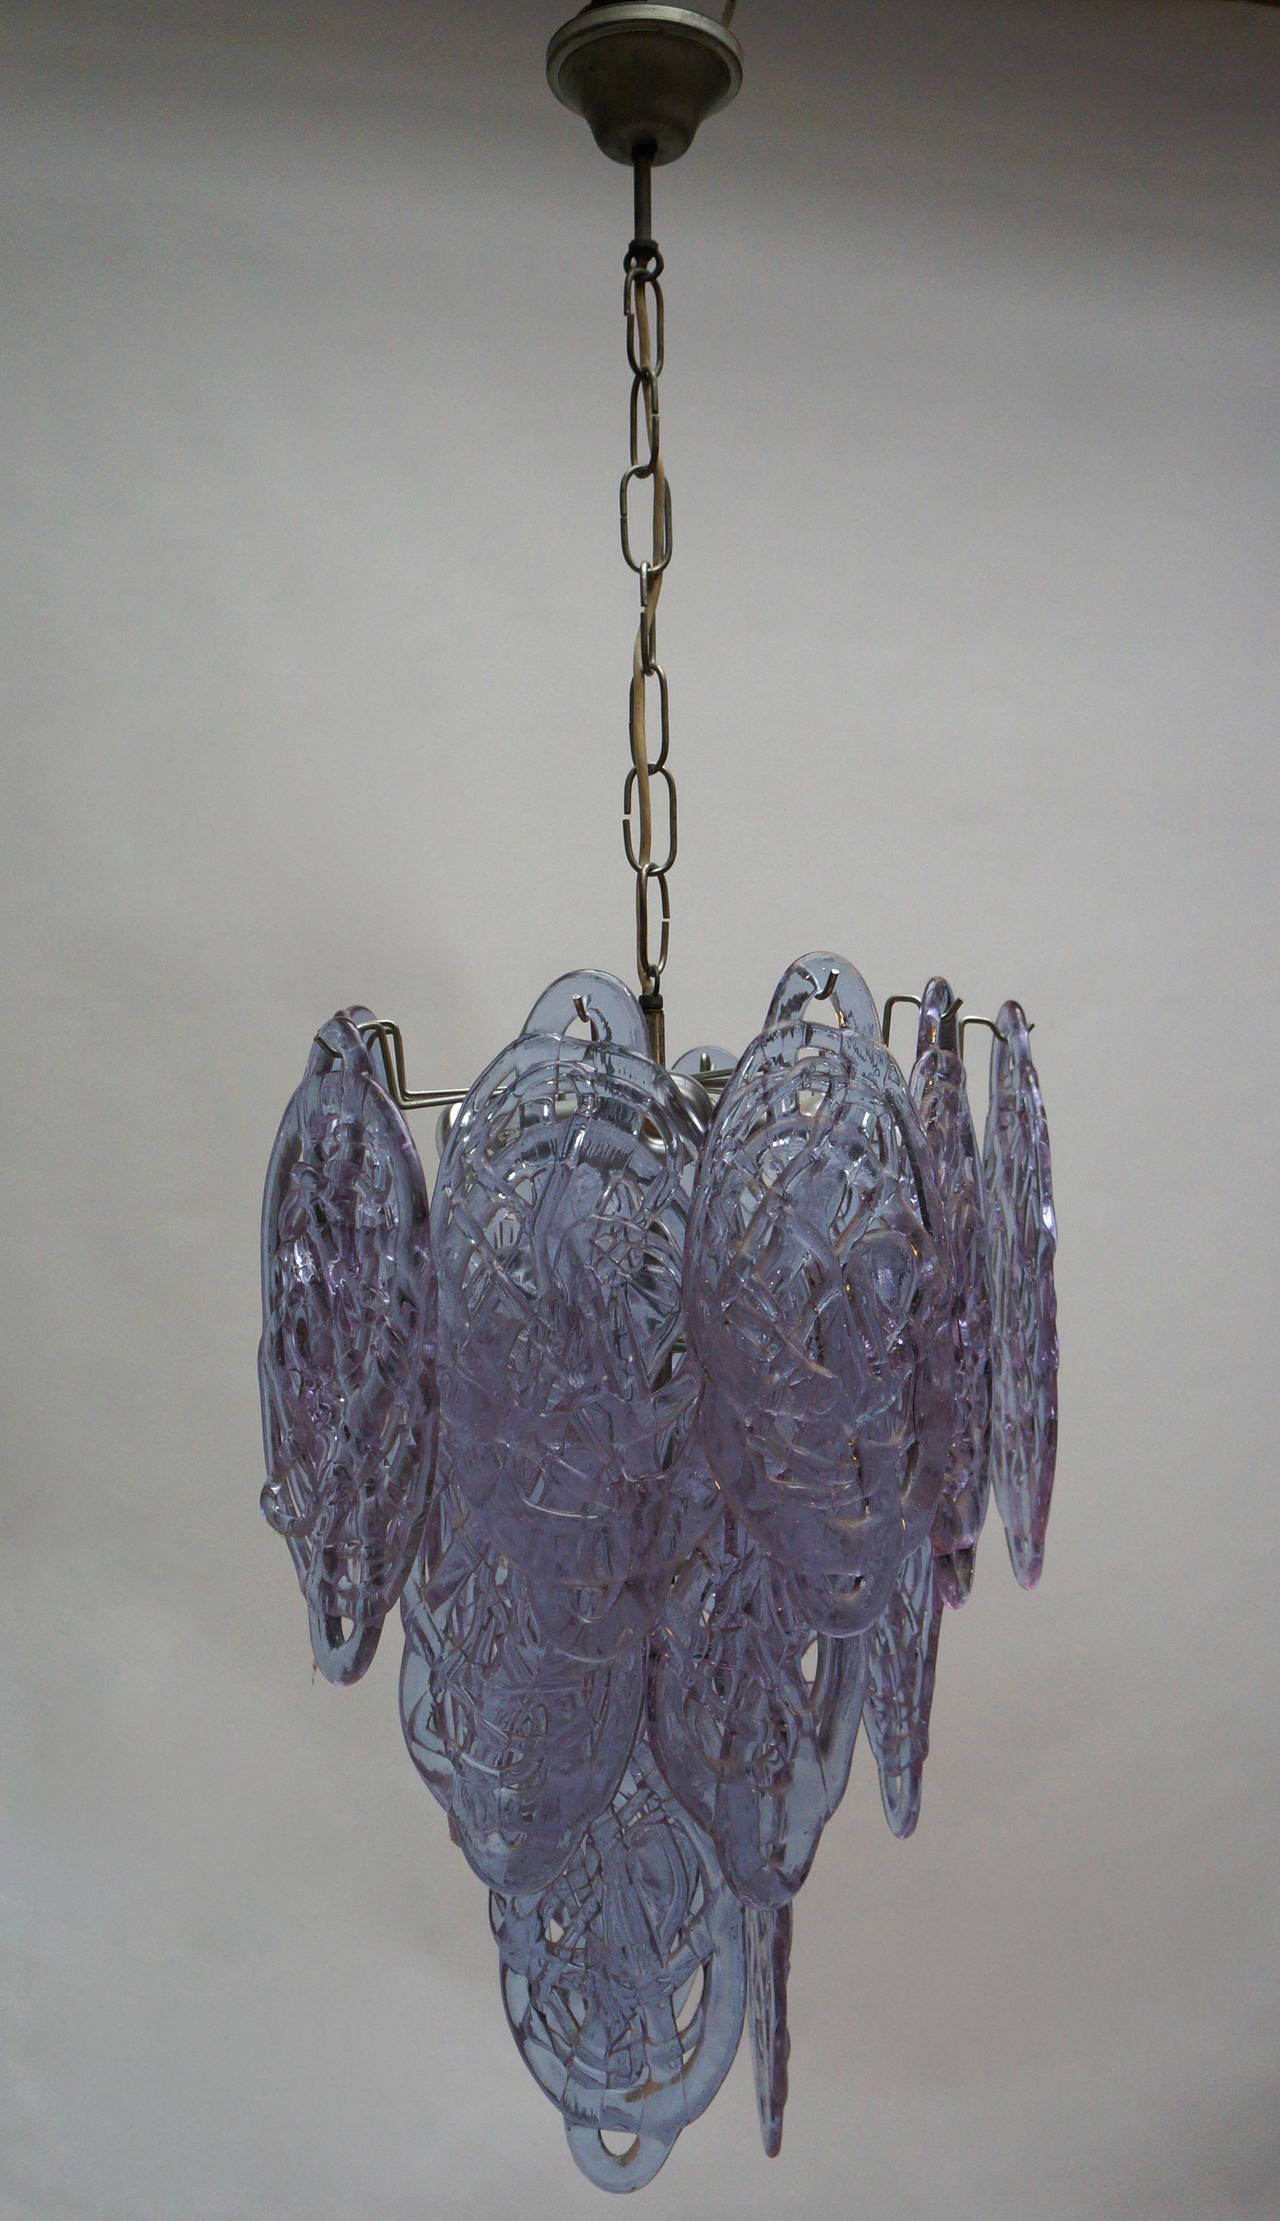 Wonderful vintage chandelier by Mazzega with purple glass pieces in a cascading motif. The glass is made to look like spun sugar and gives a great effect when lit.